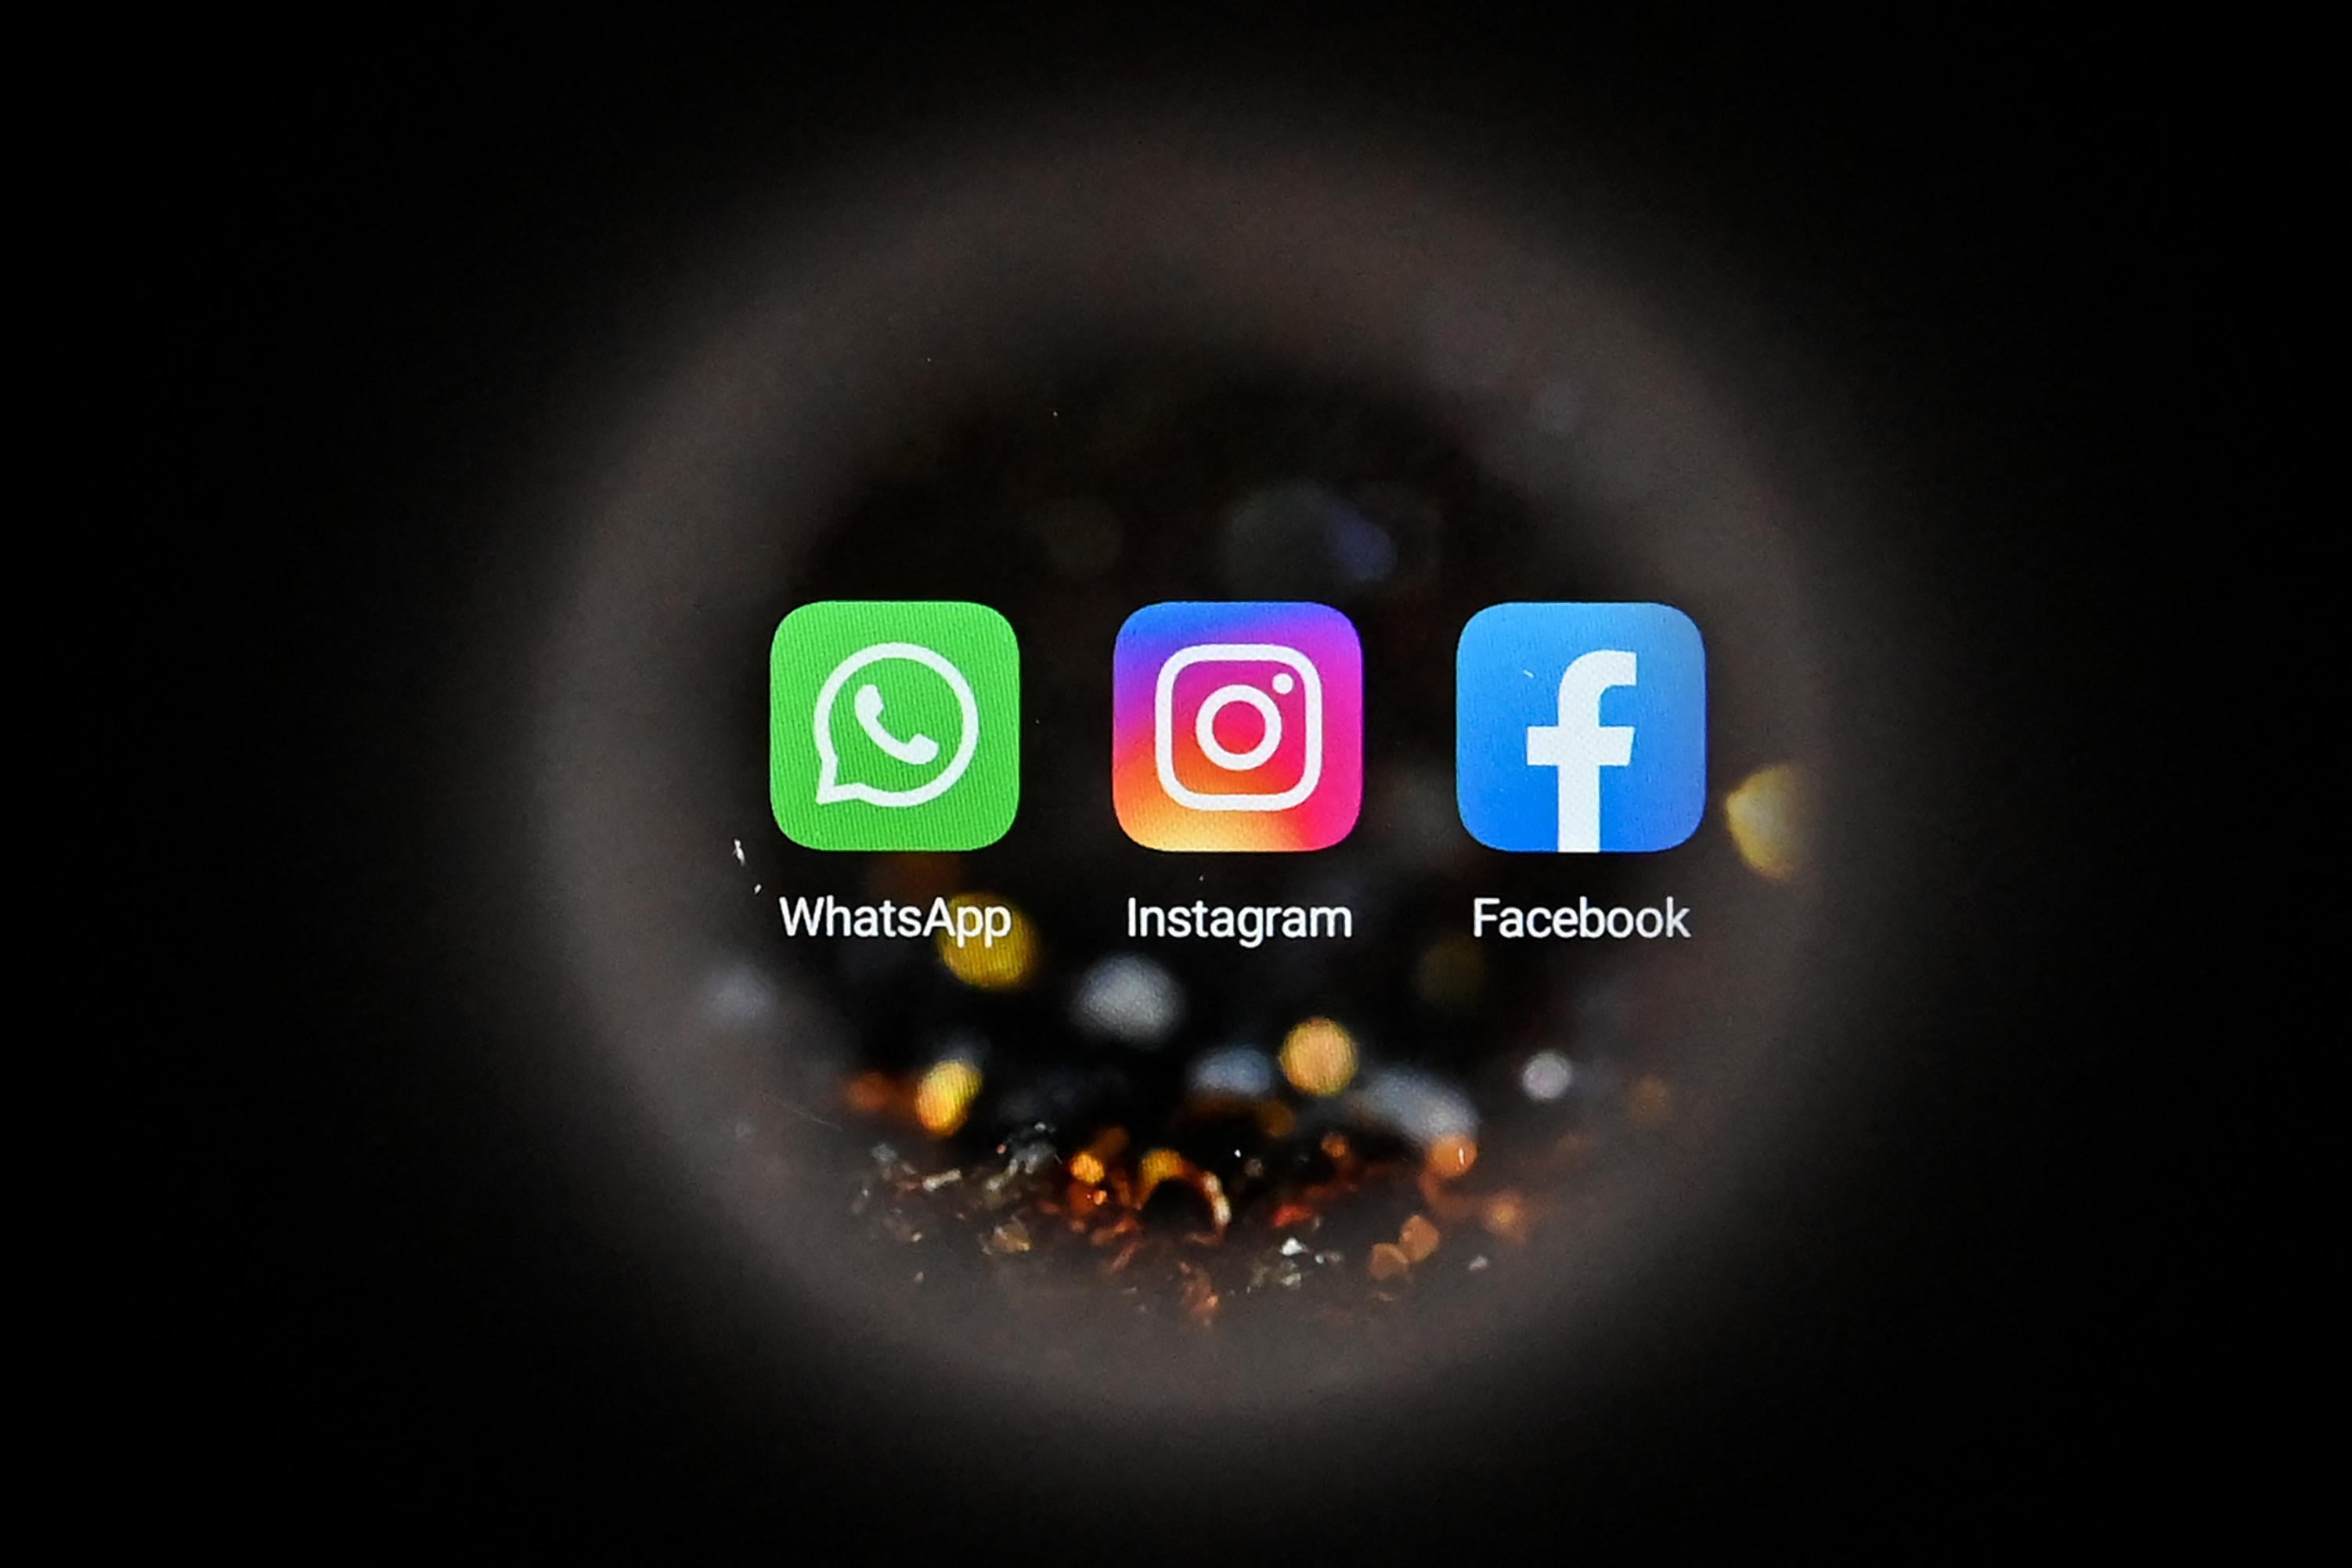 Facebook's logo, WhatsApp's logo, and Instagram's logo on a smartphone screen. 